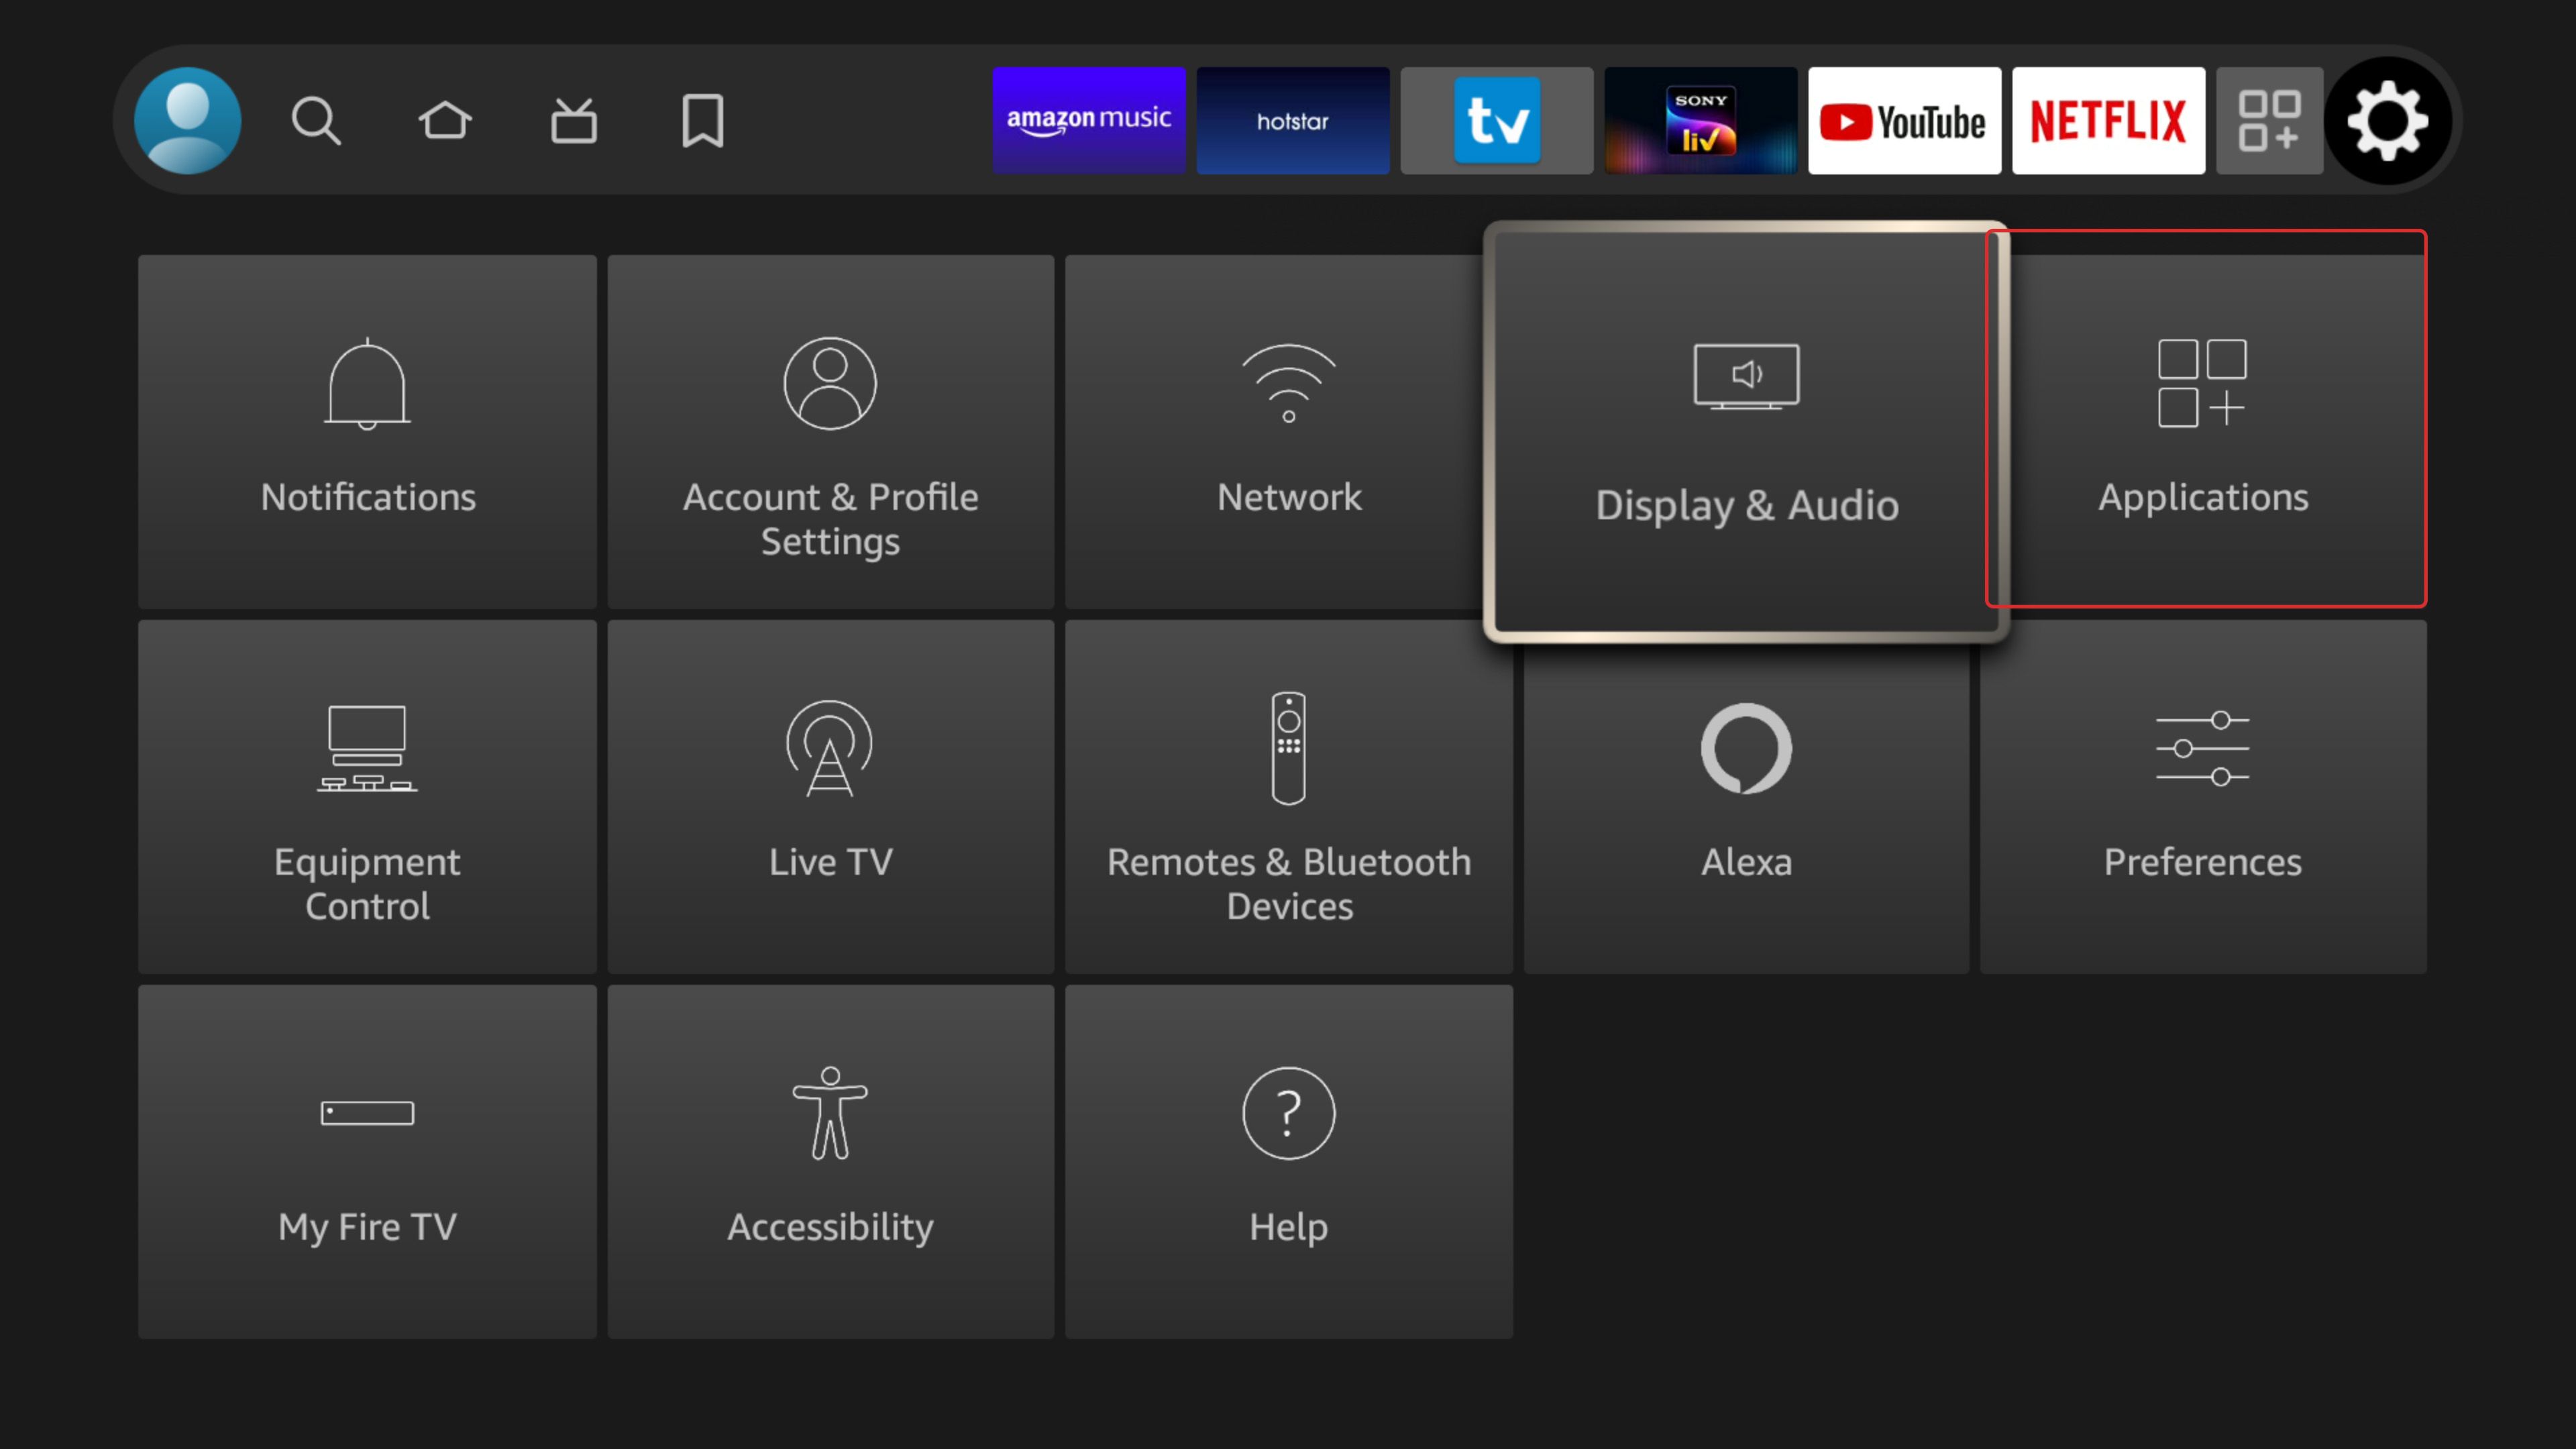 go to applications menu on Fire TV